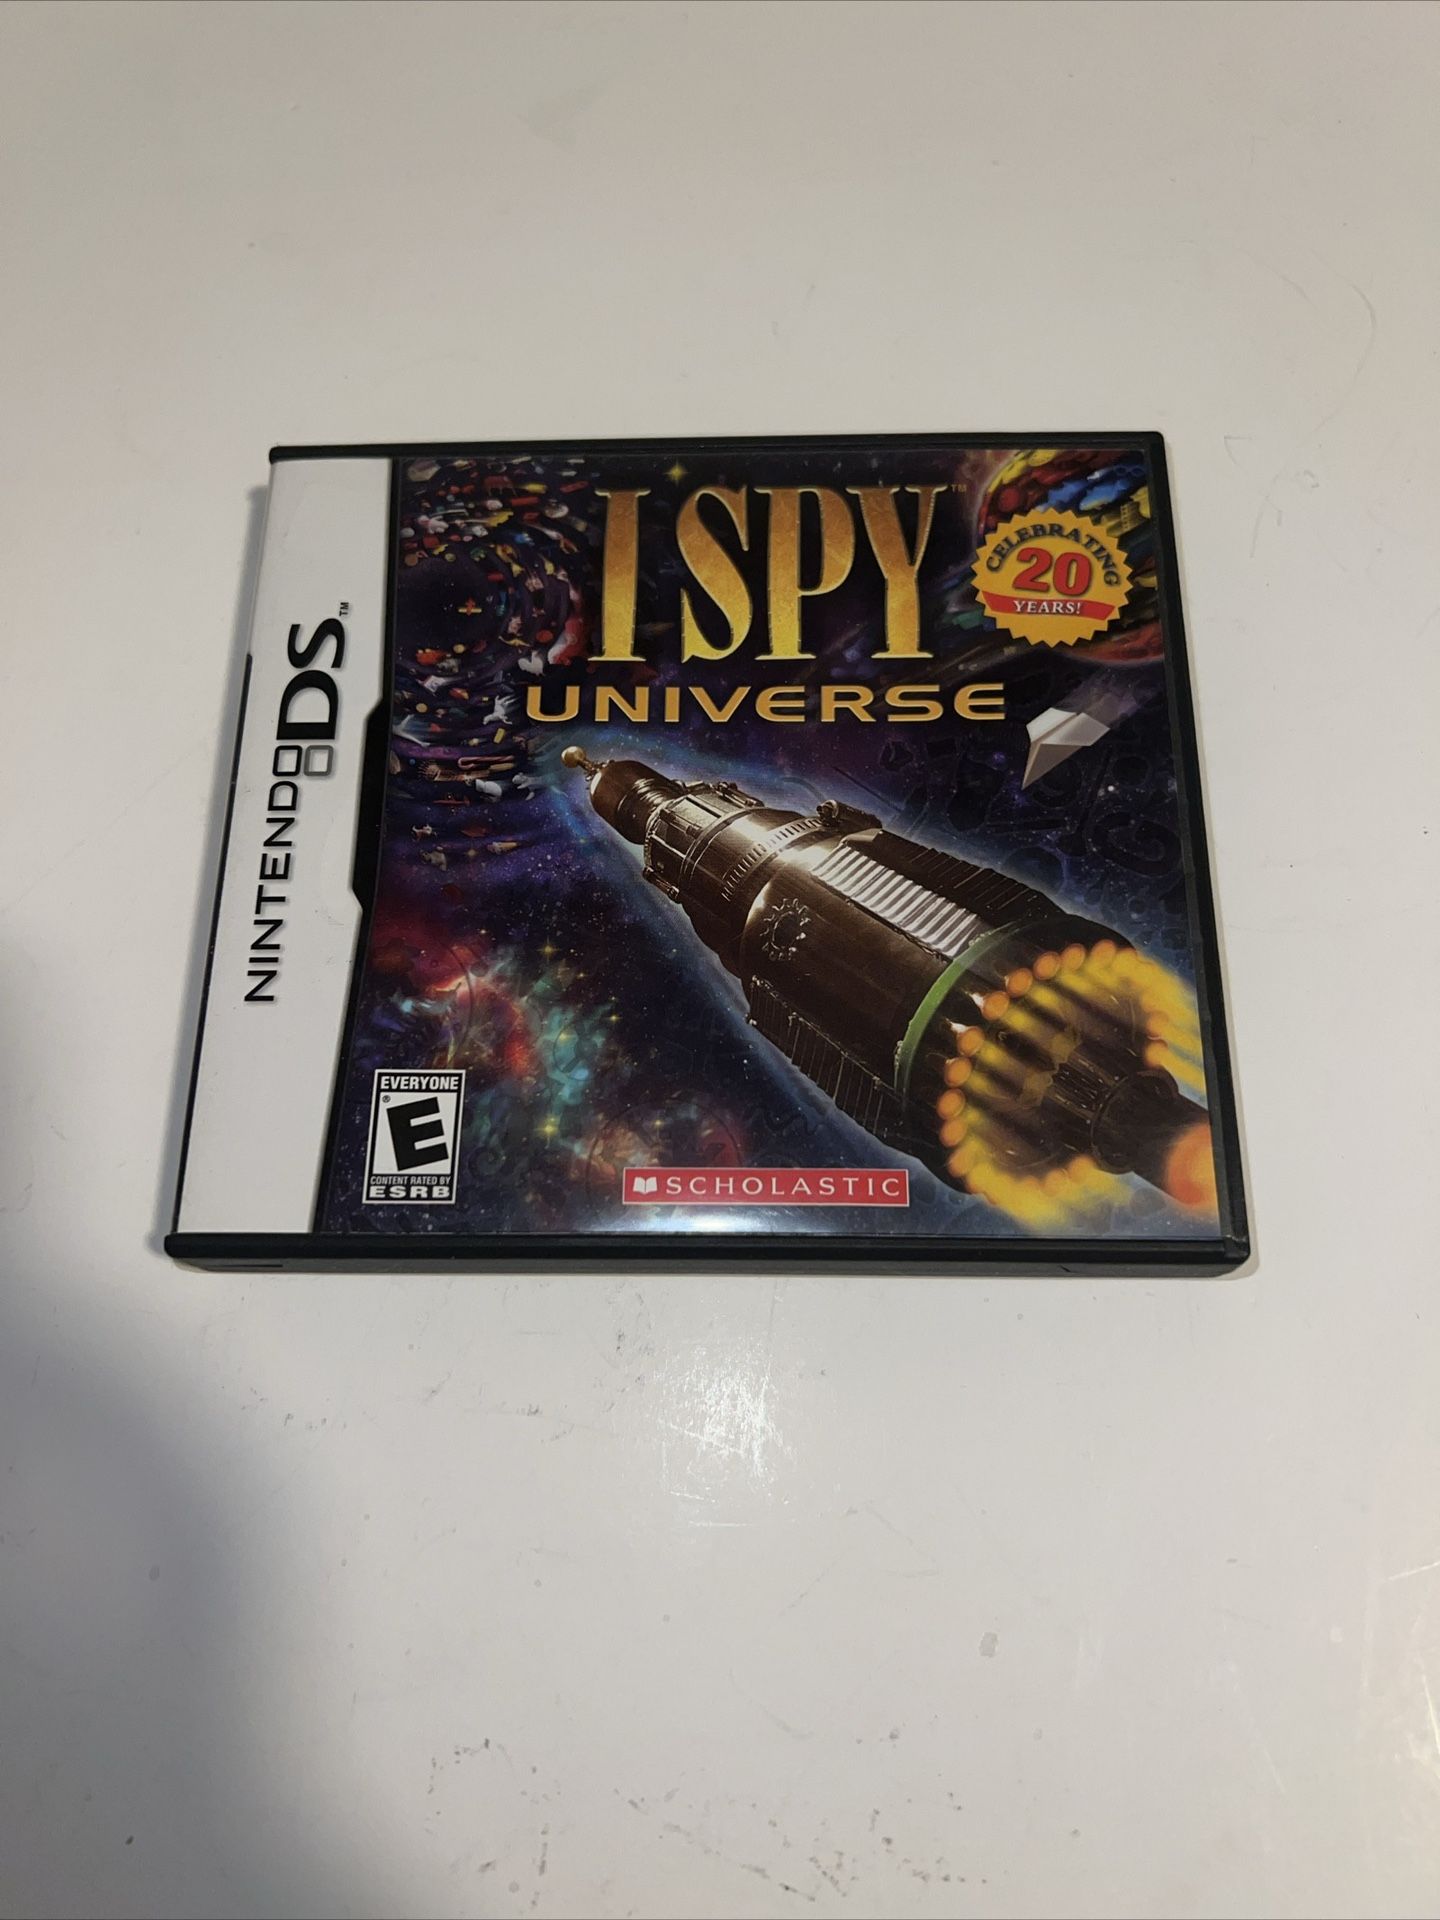 I SPY UNIVERSE NINTENDO DS COMPLETE IN BOX W/MANUAL Preowned New Condition!!  